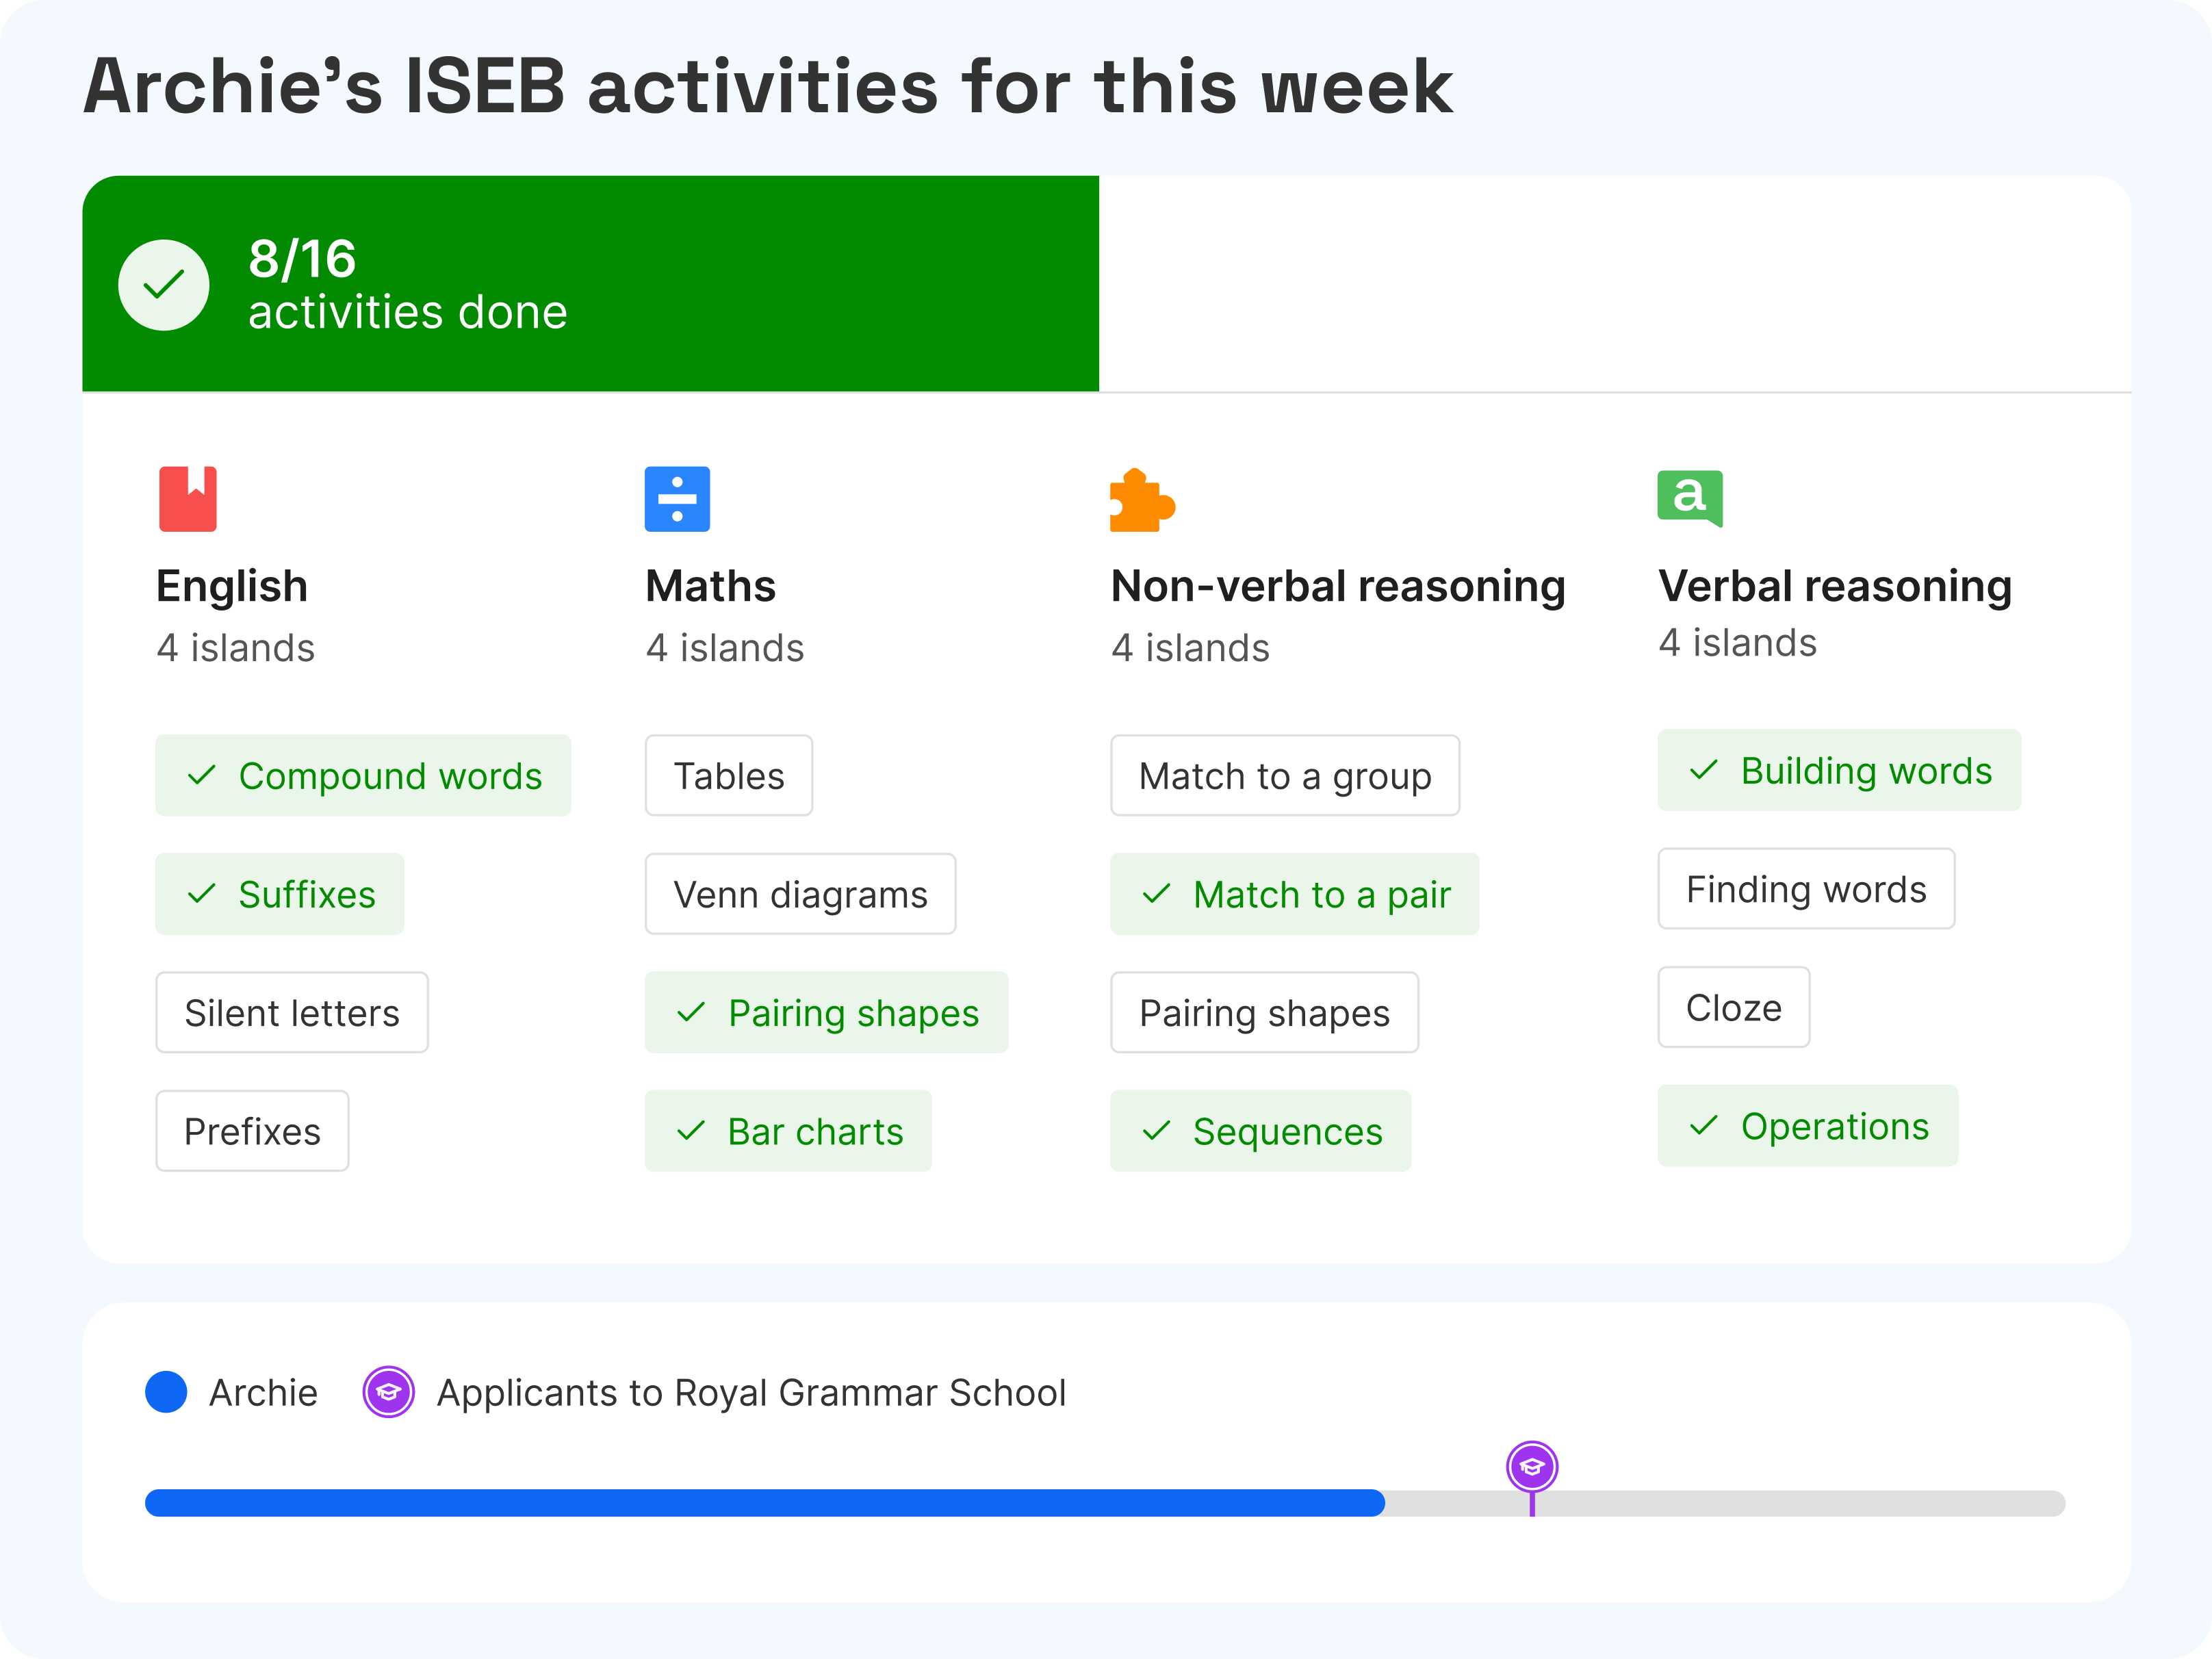 Atom Home screen showing Archie's ISEB activities for this week